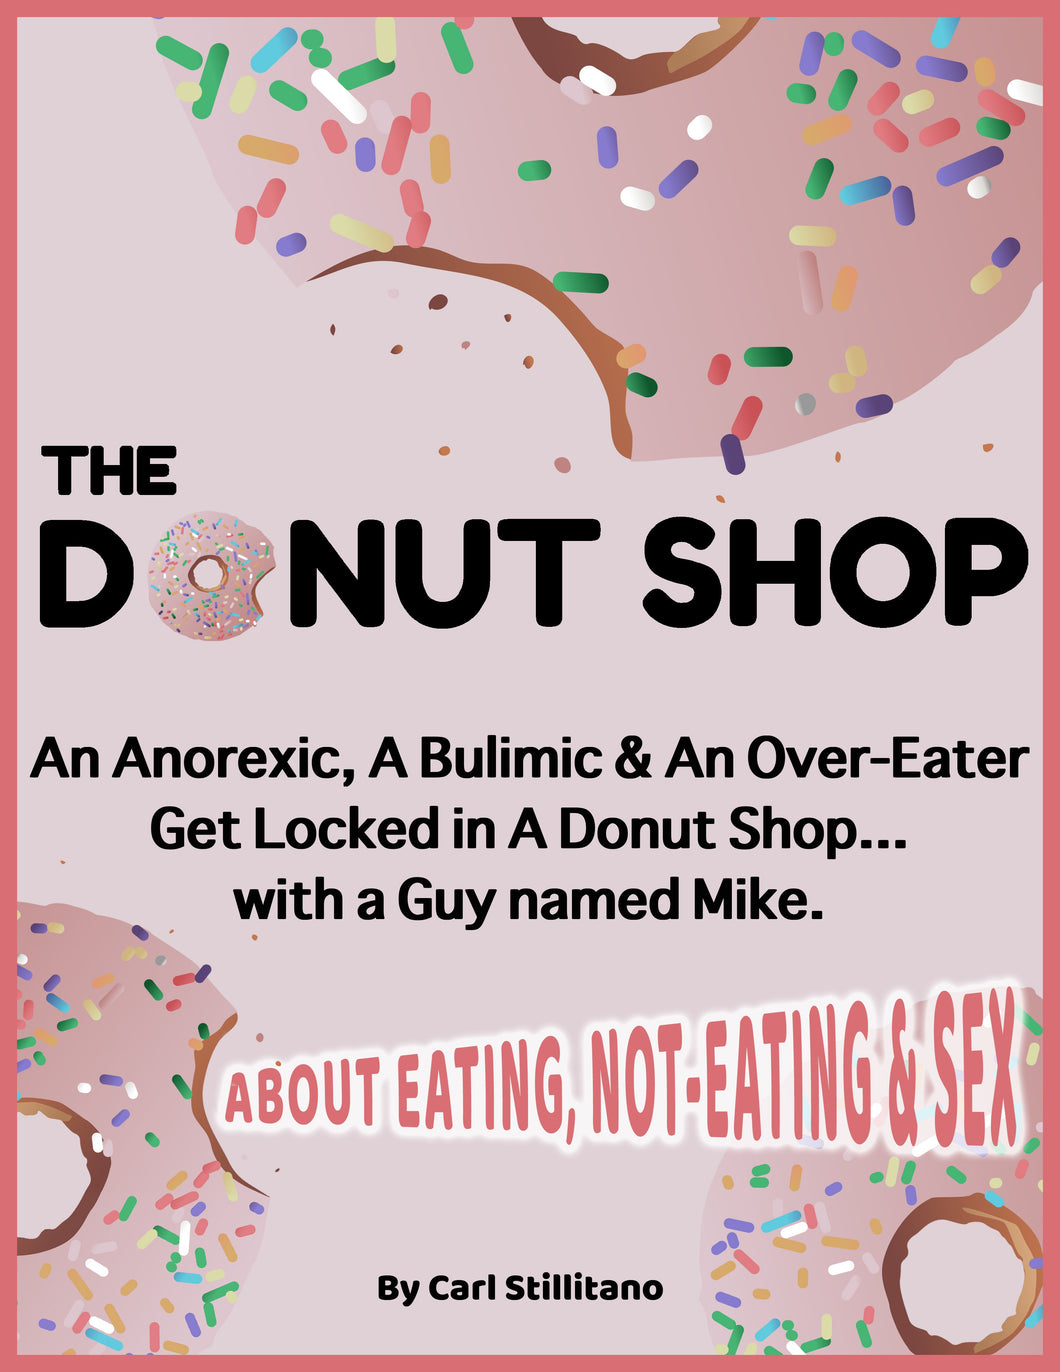 THE DONUT SHOP